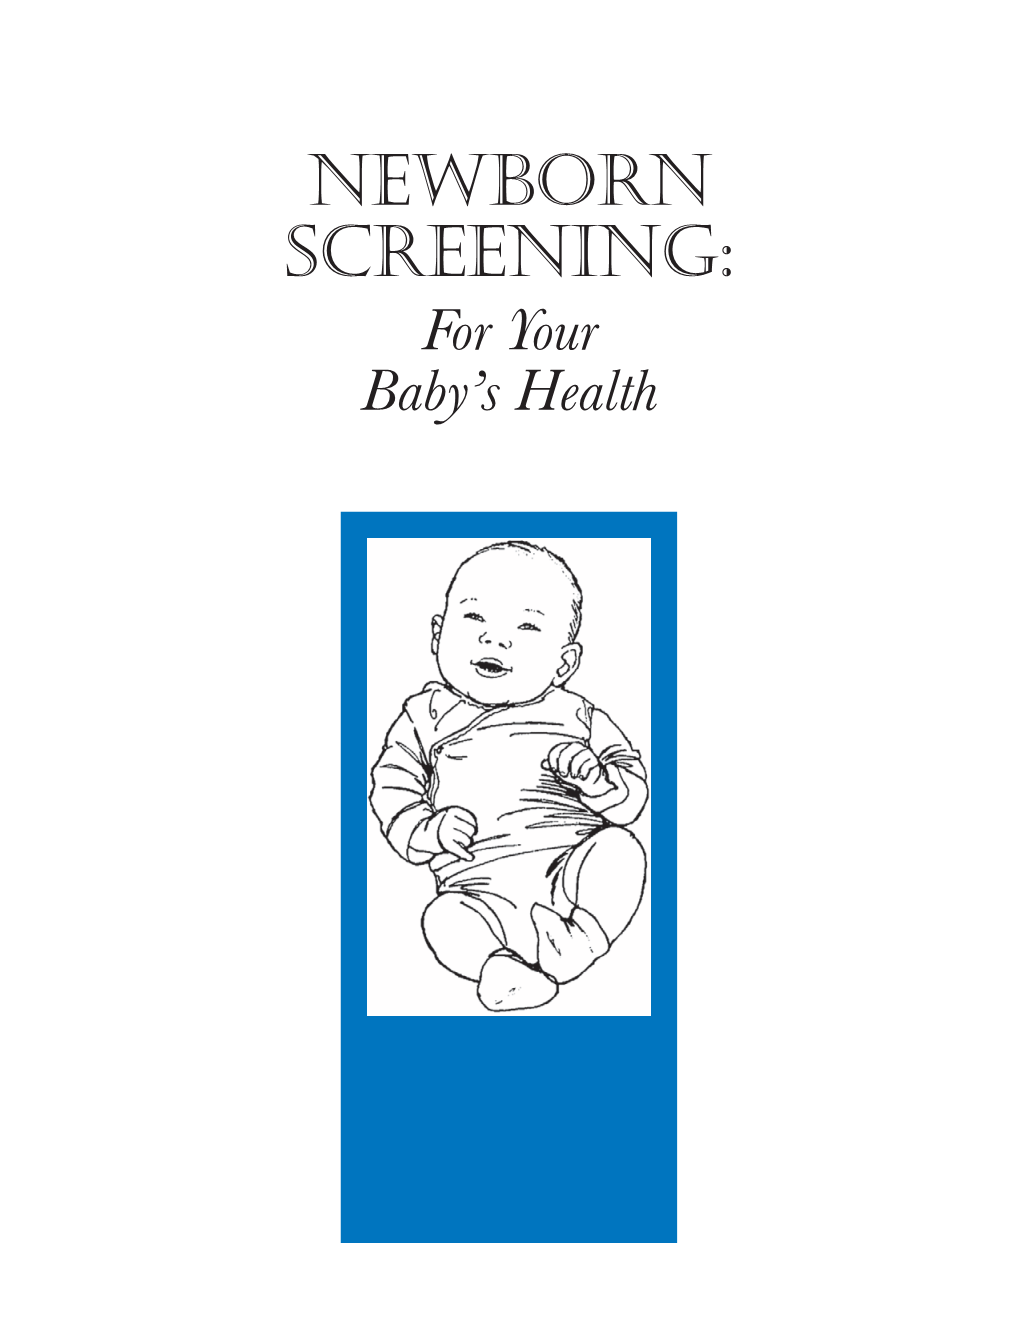 Newborn Screening Program Screens for Only a Few of the Many Disorders a Baby Could Have